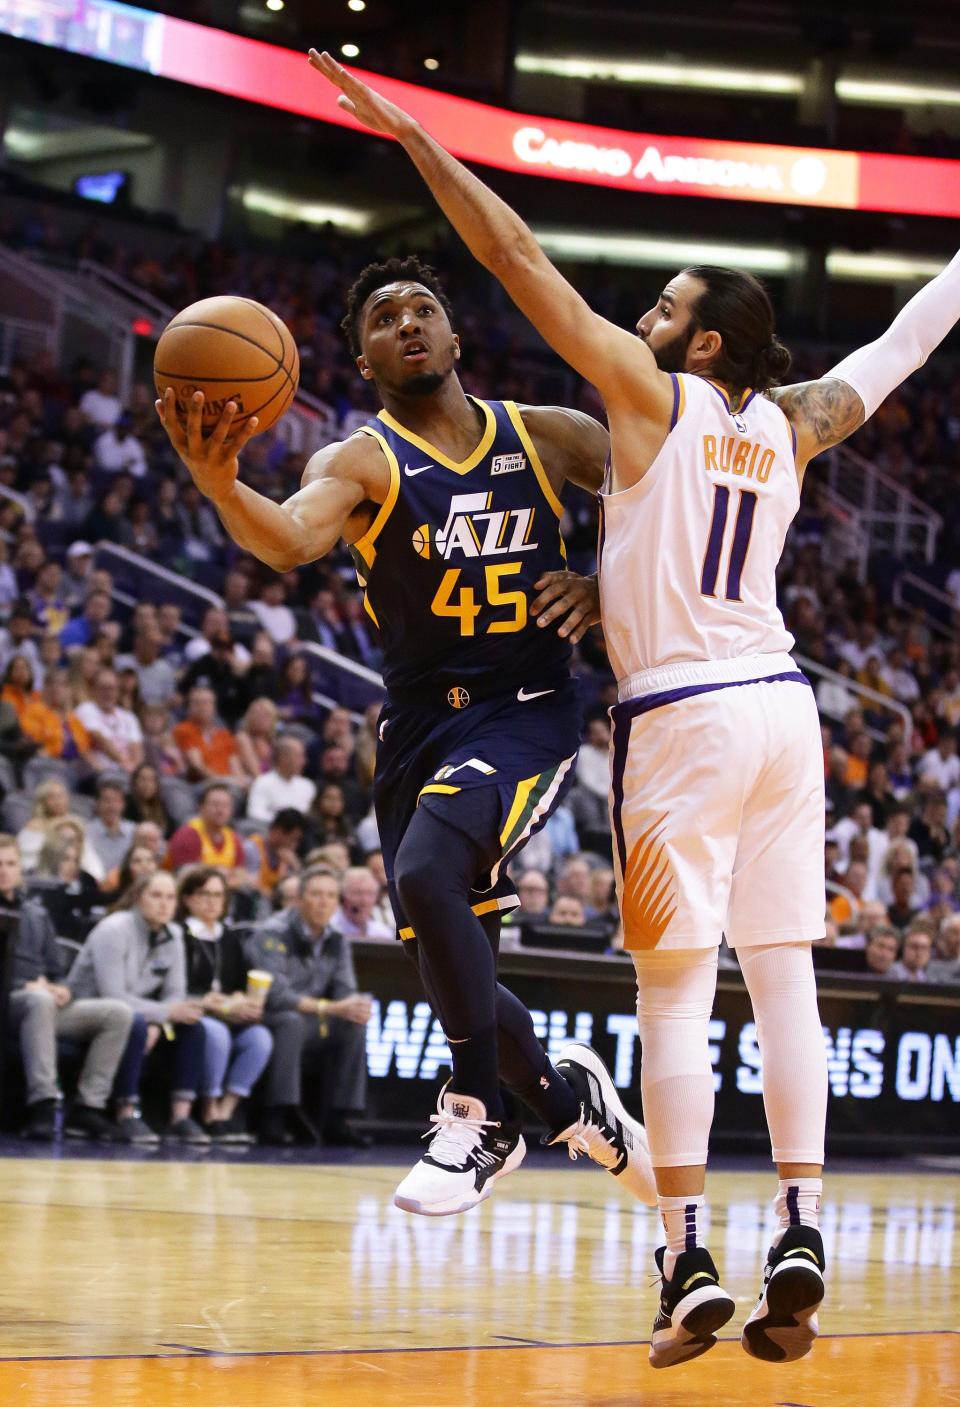 Utah Jazz guard Donovan Mitchell (45) drives to the basket against Phoenix Suns guard Ricky Rubio (11) in the first half on Oct. 28, 2019 in Phoenix, Ariz.